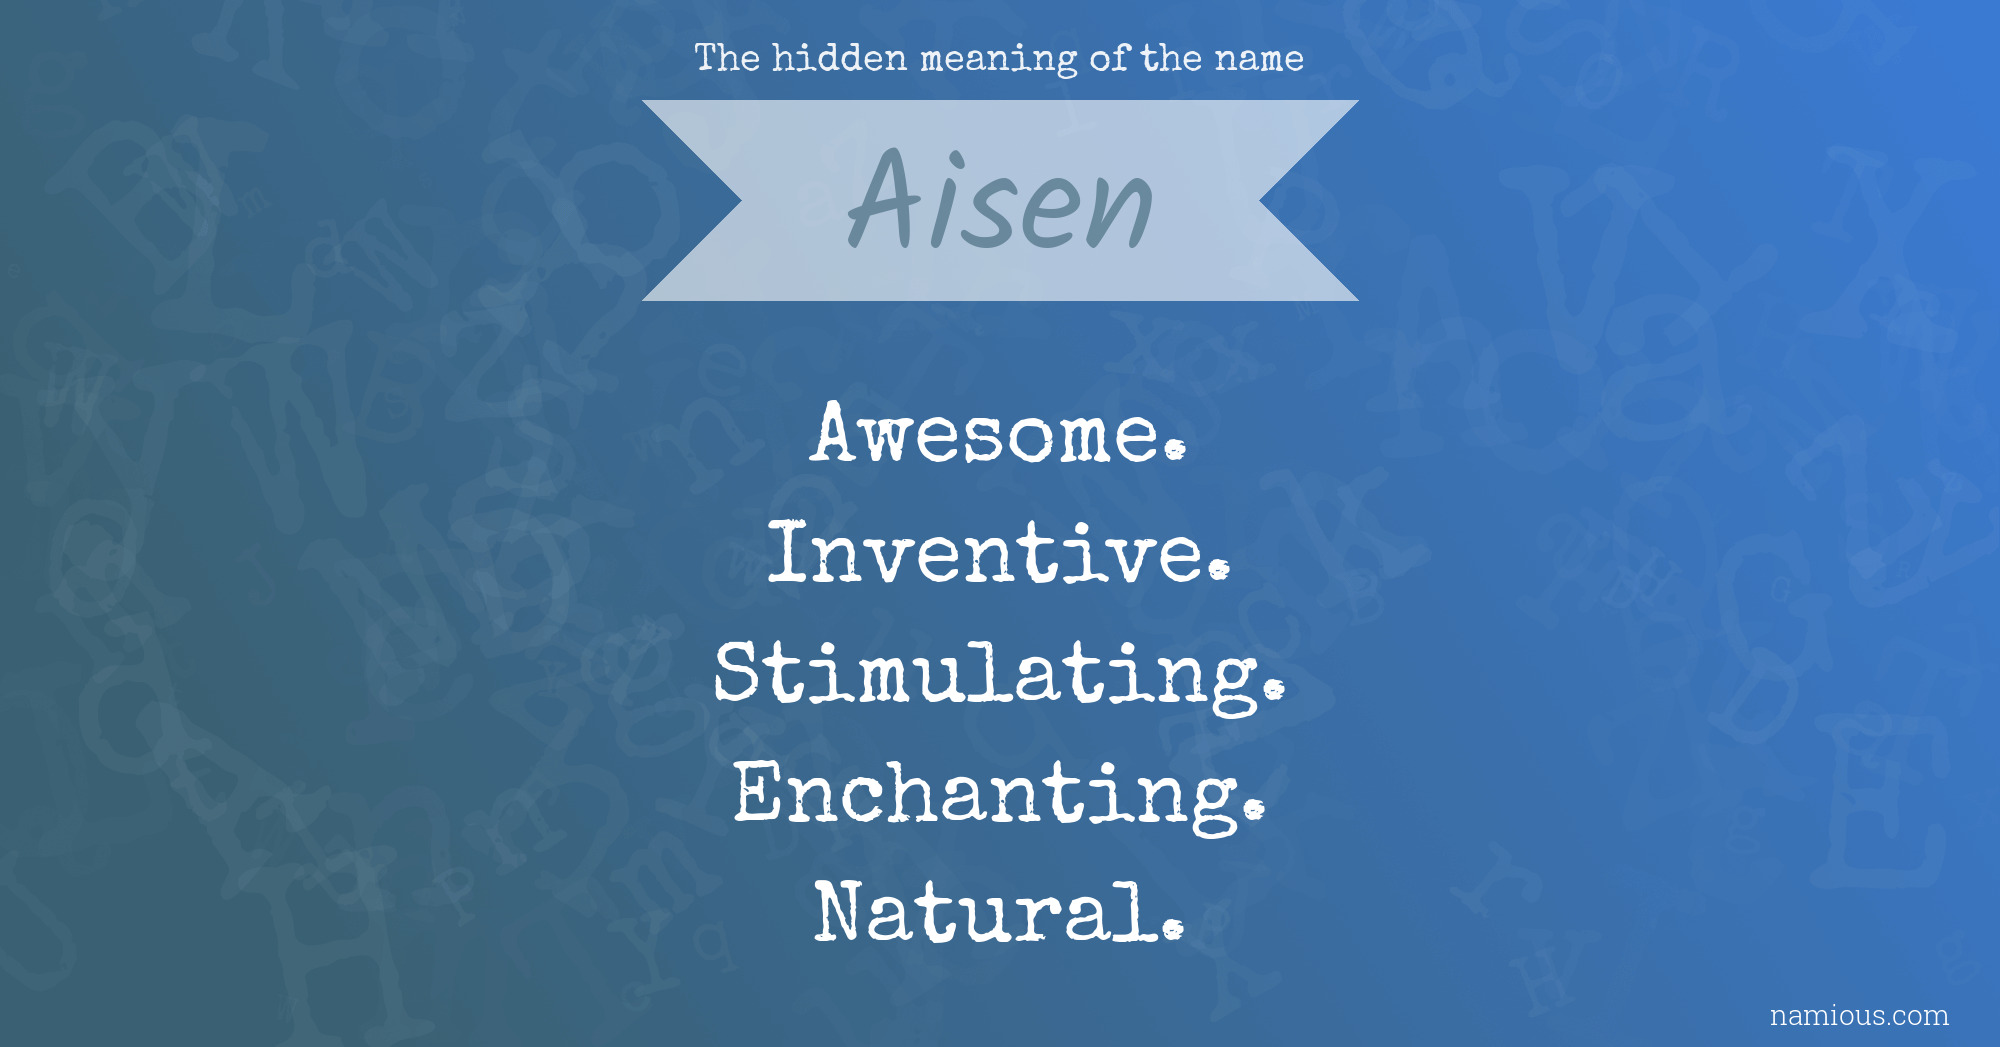 The hidden meaning of the name Aisen